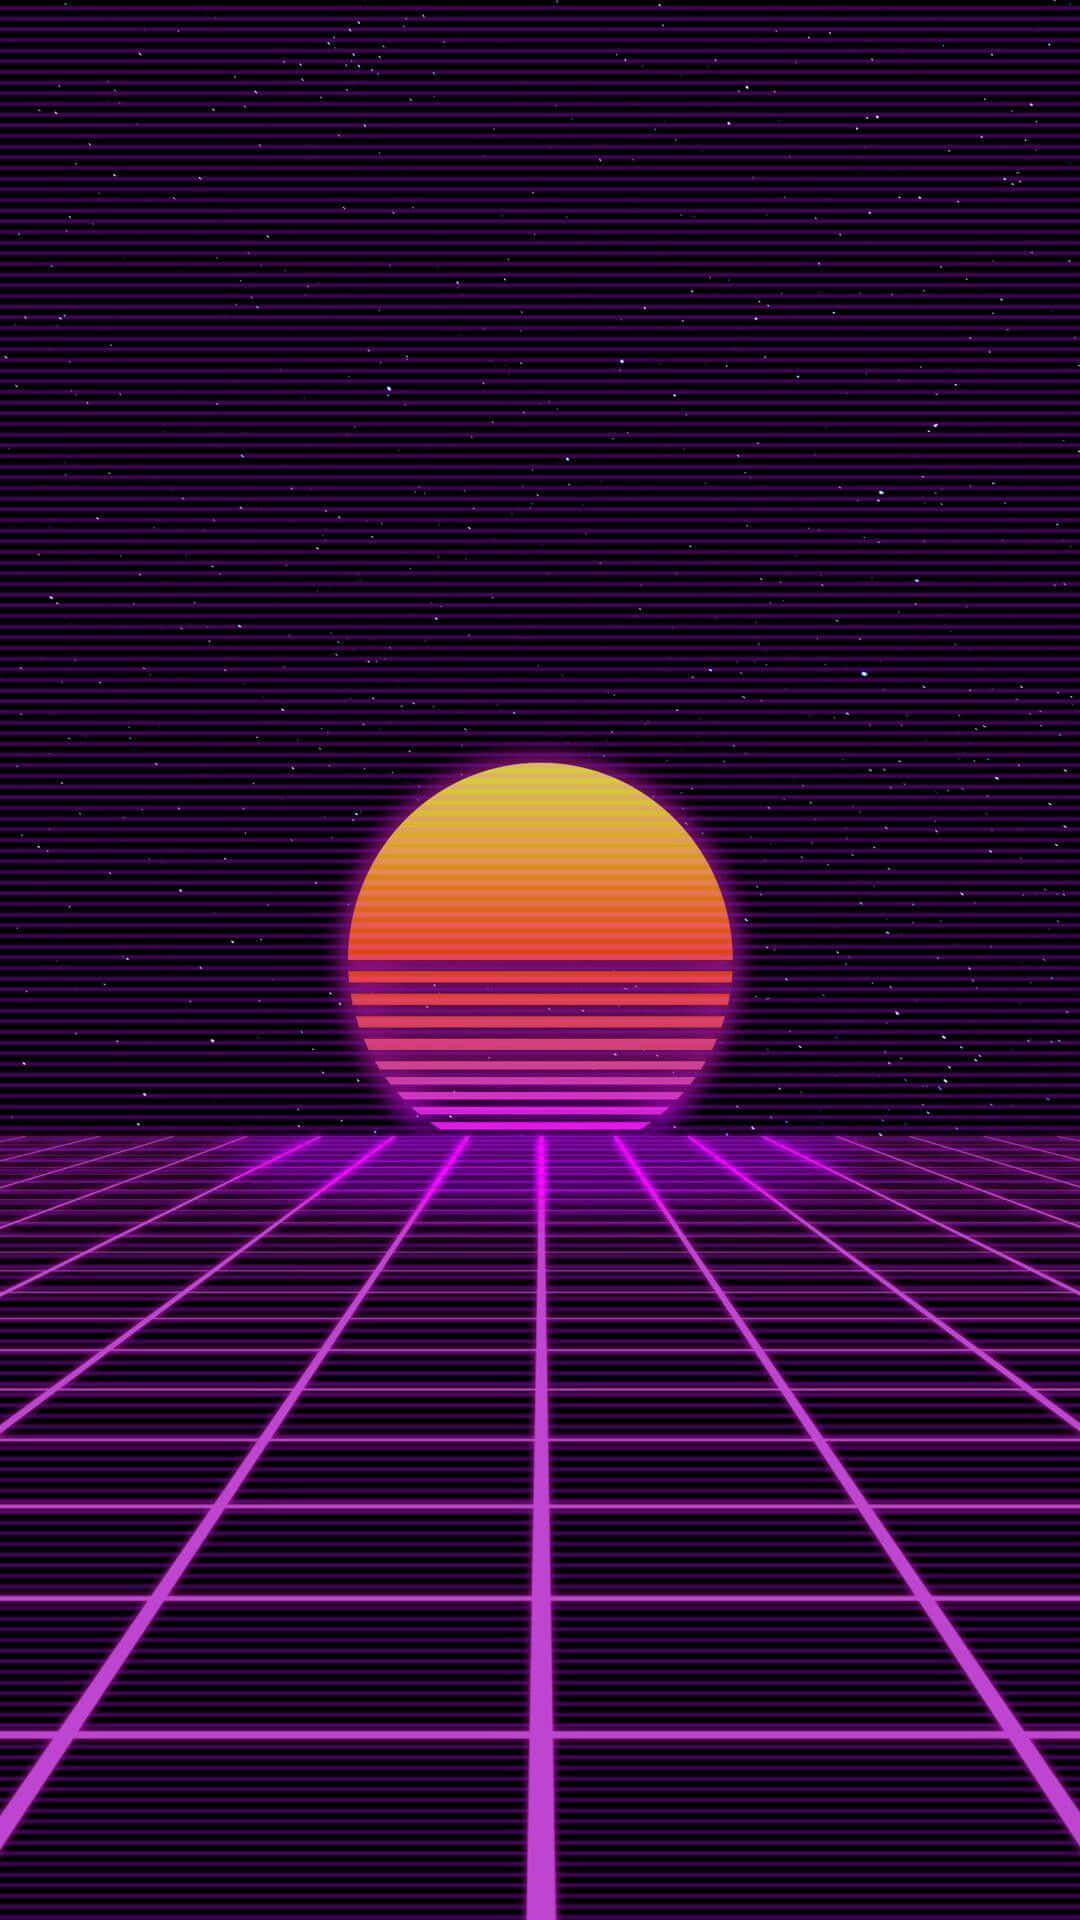 Synthwave sunset wallpaper for your phone - 80s